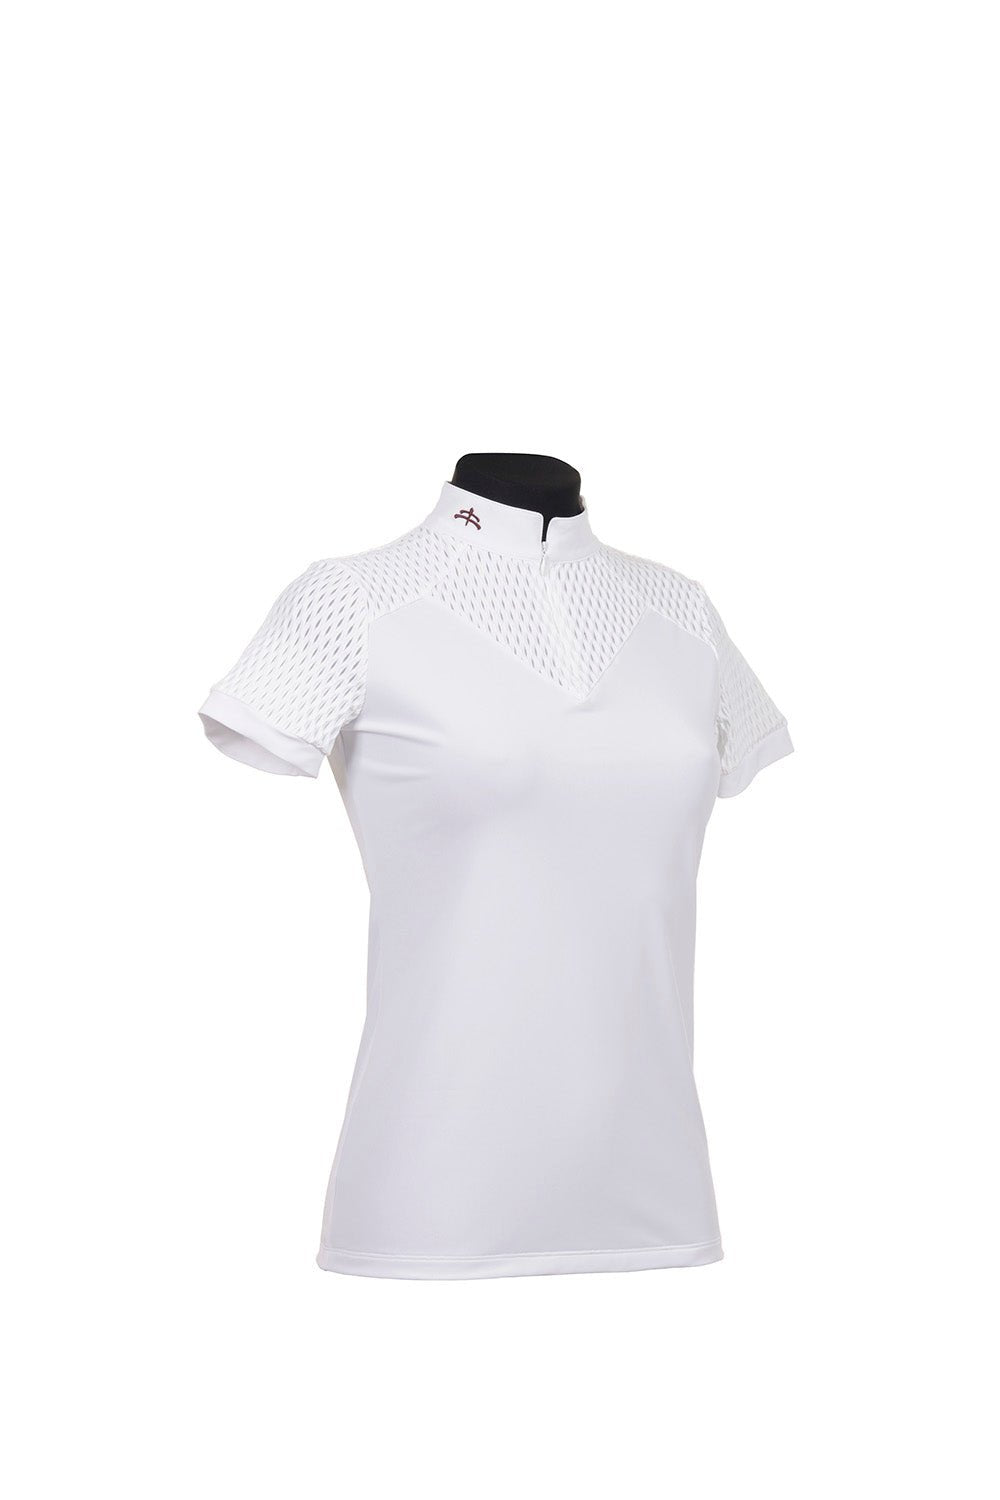 Makebe Italy Short Sleeve KJ Show Shirt - Equiluxe Tack